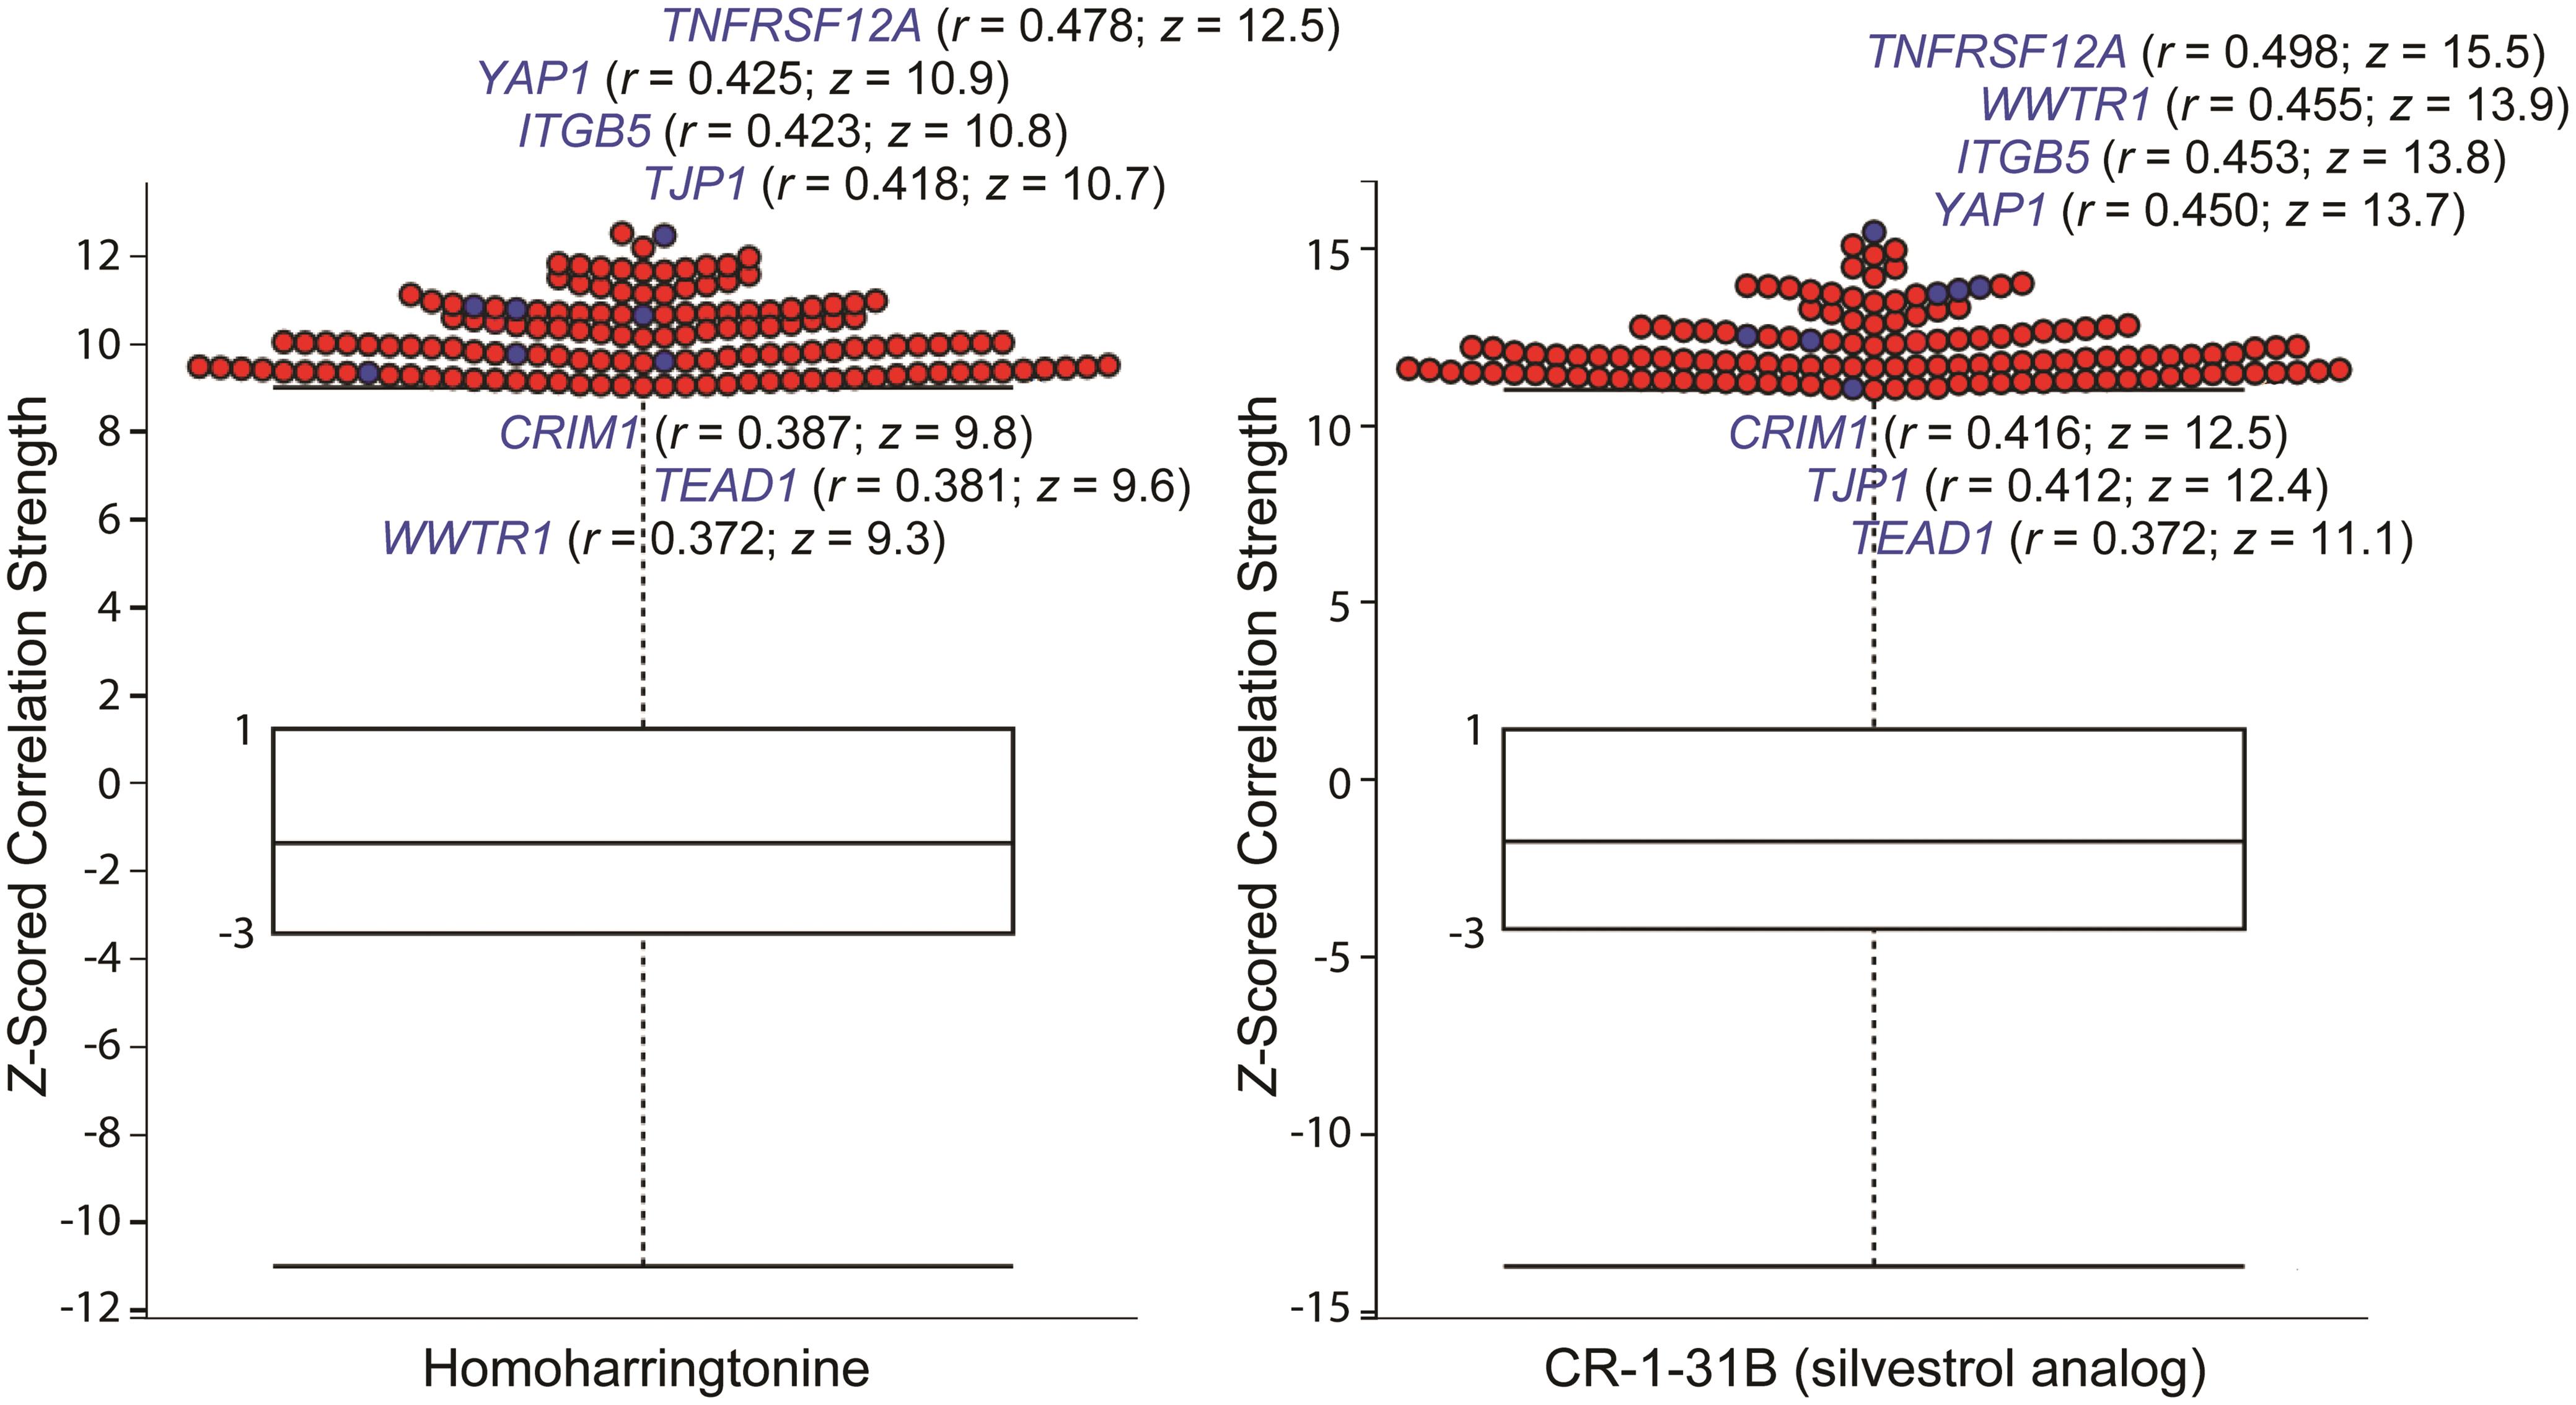 Box-and-whisker plots of 18,543 correlation coefficients of transcript levels to omacetaxine mepesuccinate (homoharringtonine; left) and CR-1-31B (right) sensitivity.